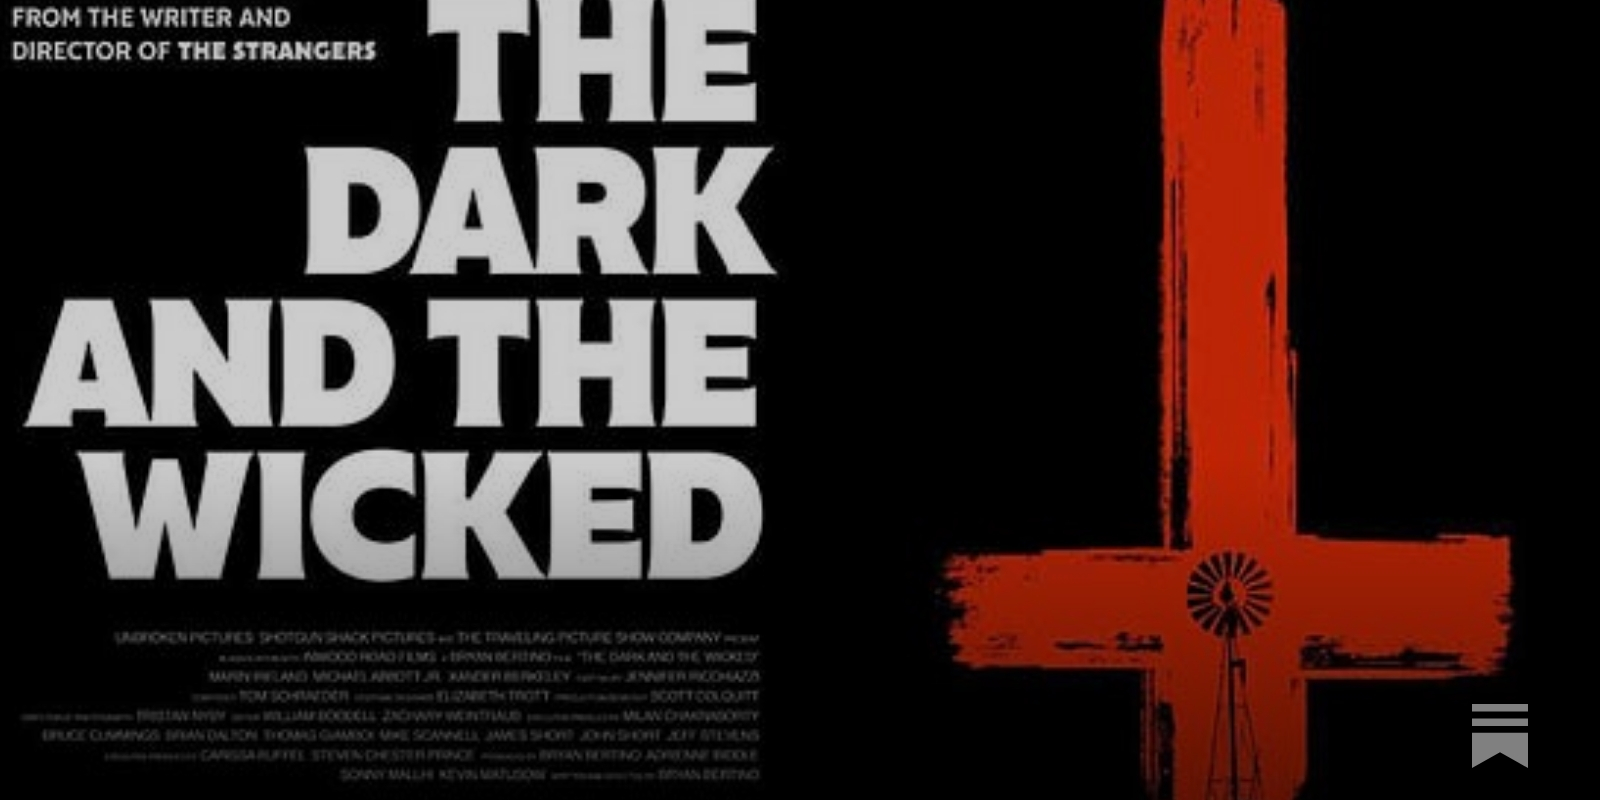 John's Horror Corner: The Dark and the Wicked (2020), a chilling and  unforgiving account of mortals exposed to primordial evil.